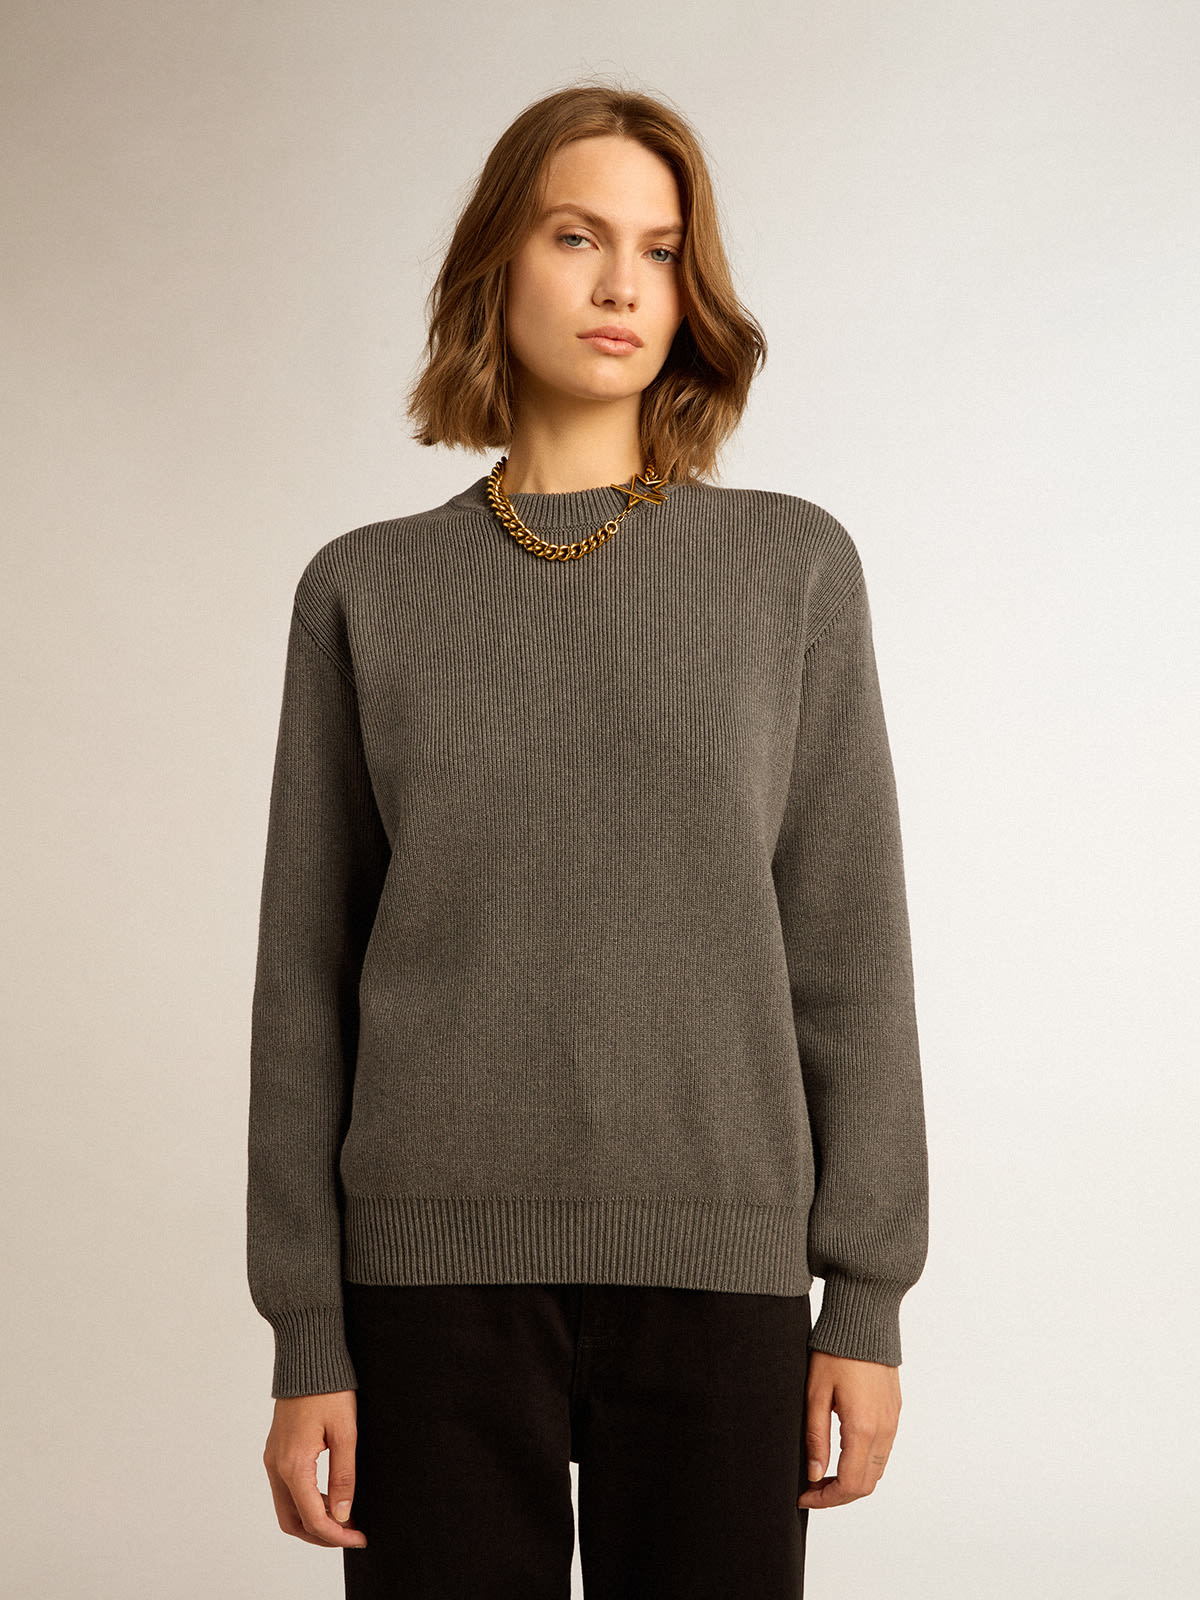 Golden Goose - Women's round-neck sweater in dark gray cotton with logo on the back in 